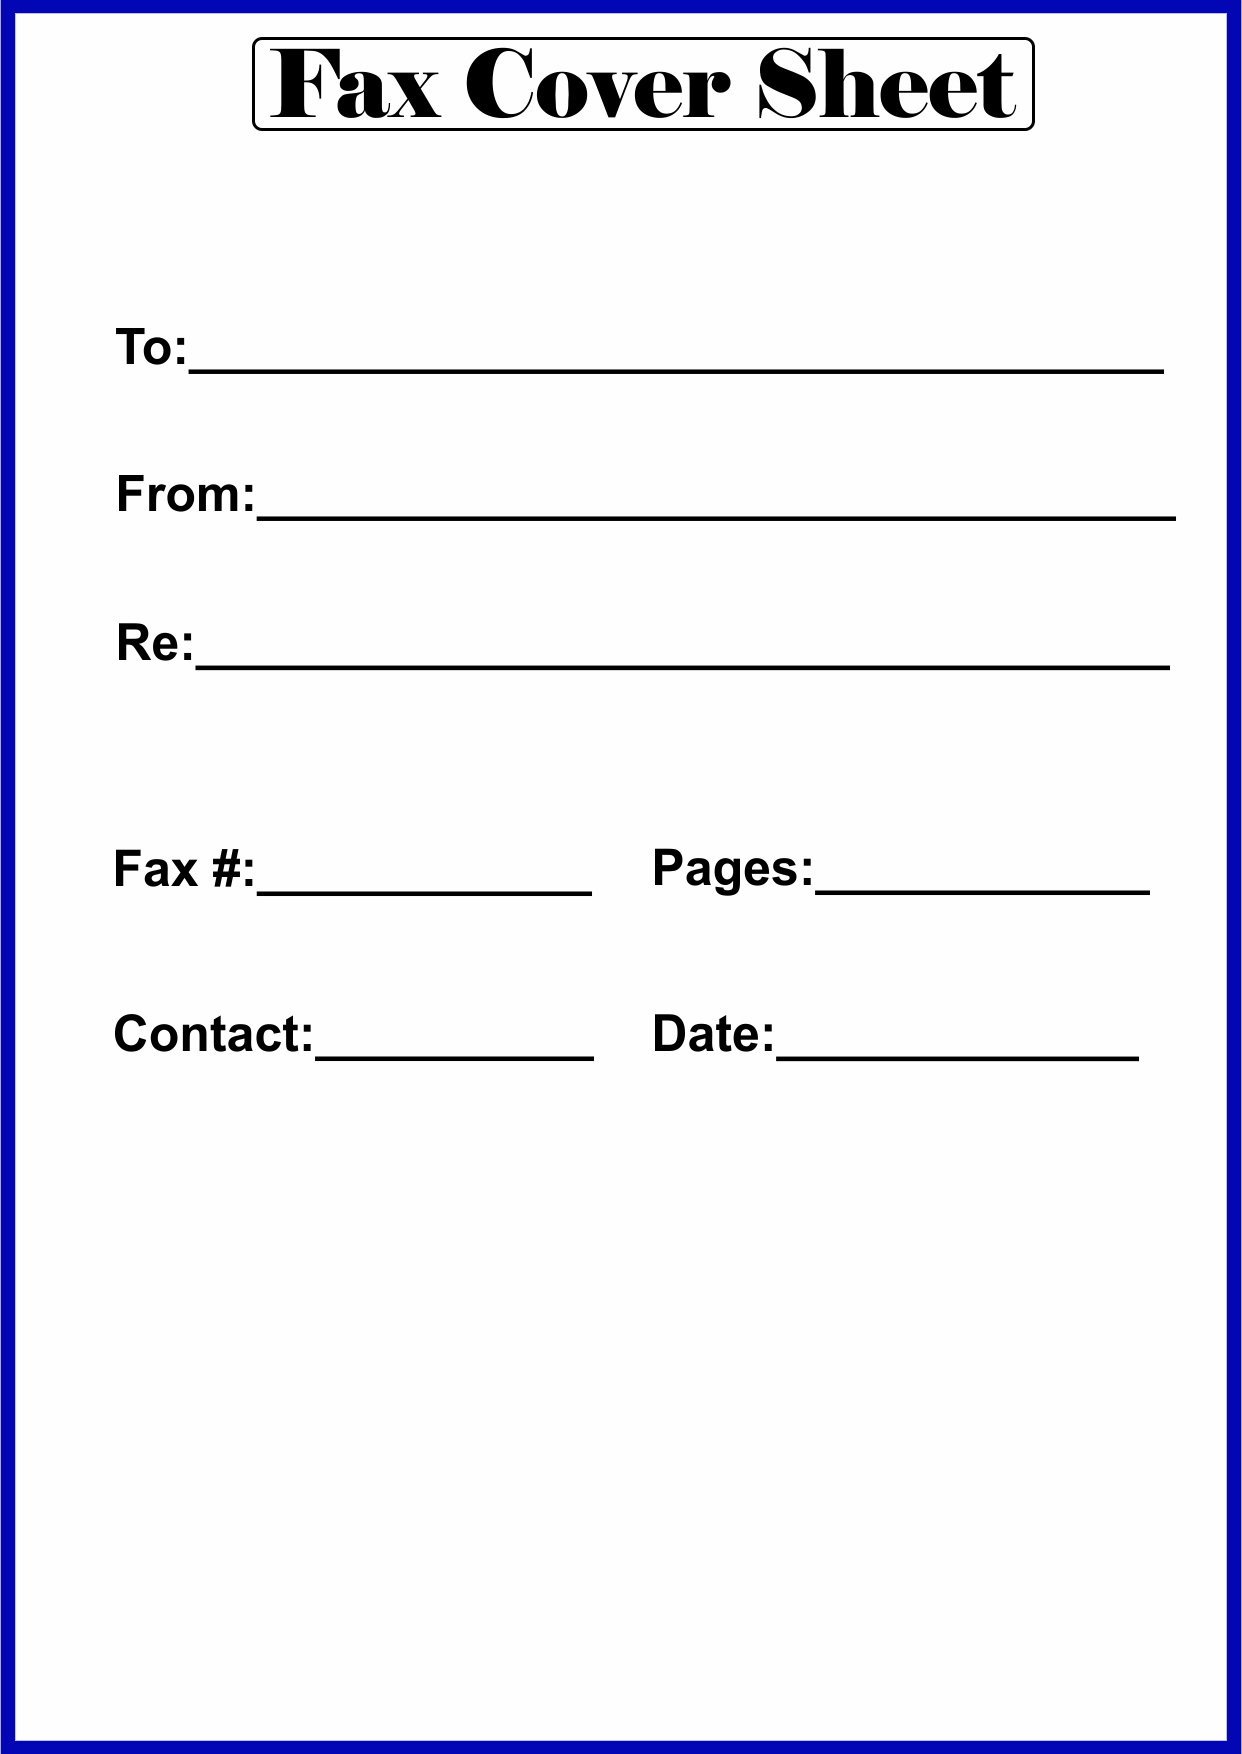 Personal Fax Cover Sheet from faxcoversheethub.com